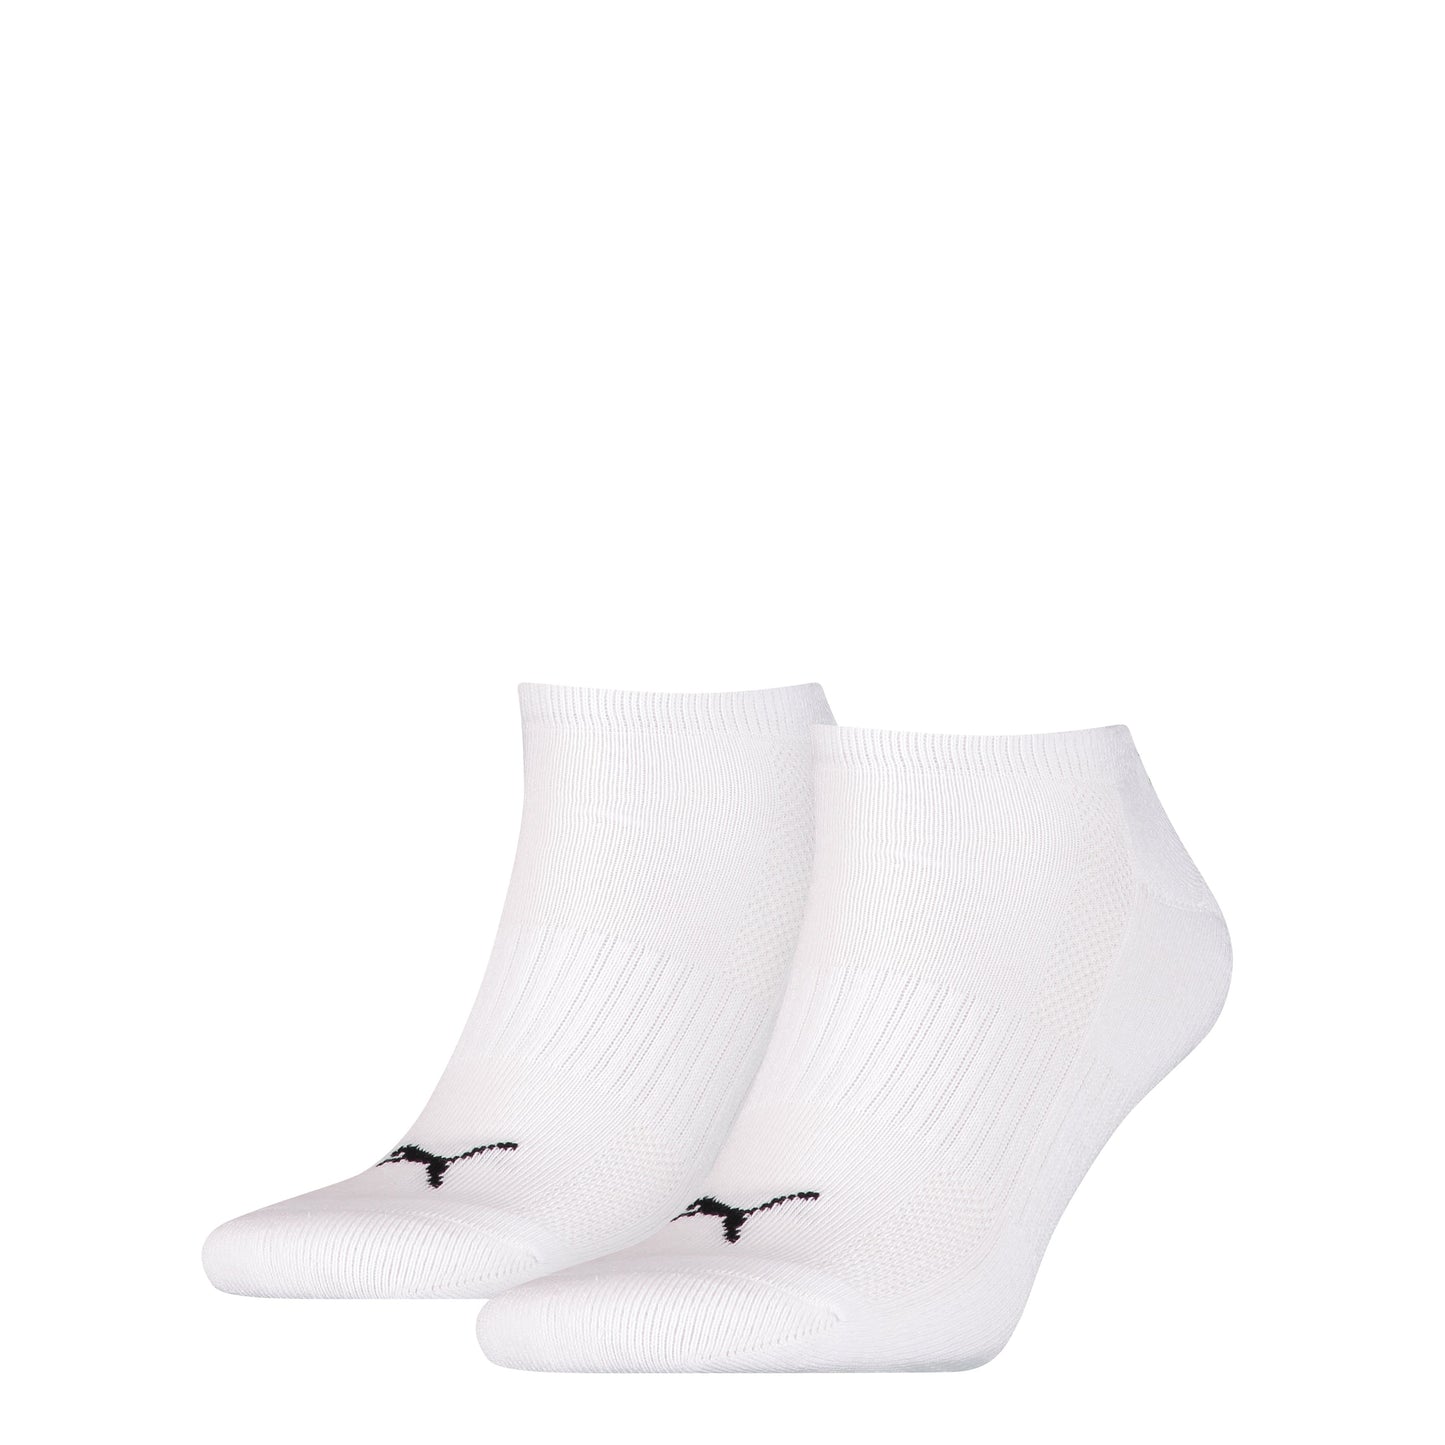 PUMA Trainer Socks  (2 pairs for $18)  (4 pairs for $27)